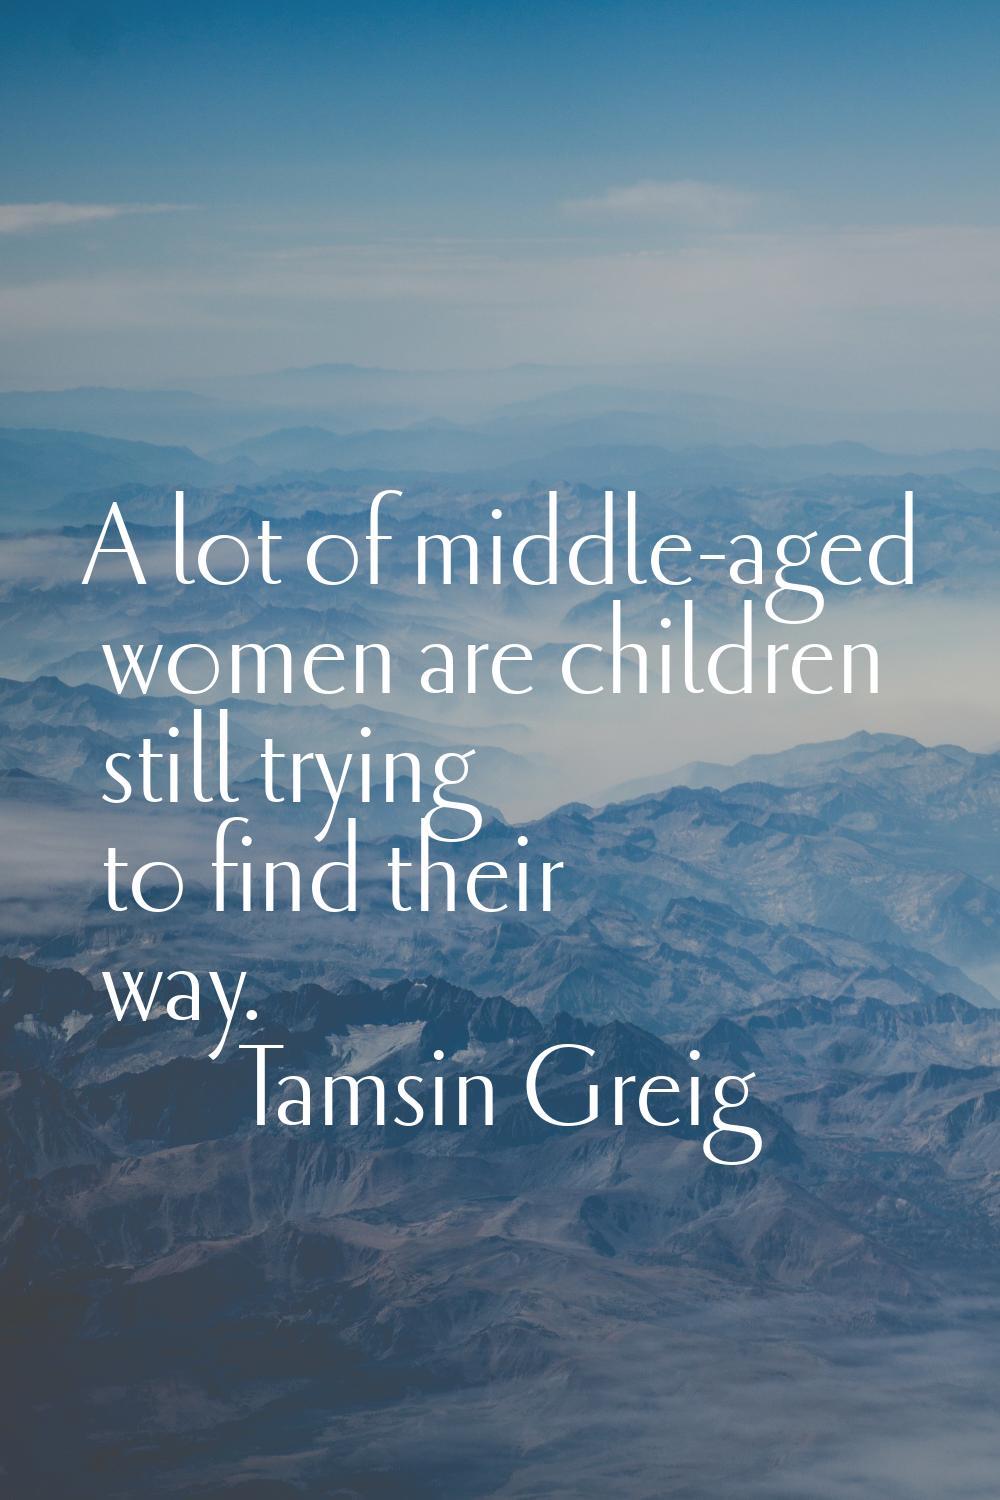 A lot of middle-aged women are children still trying to find their way.